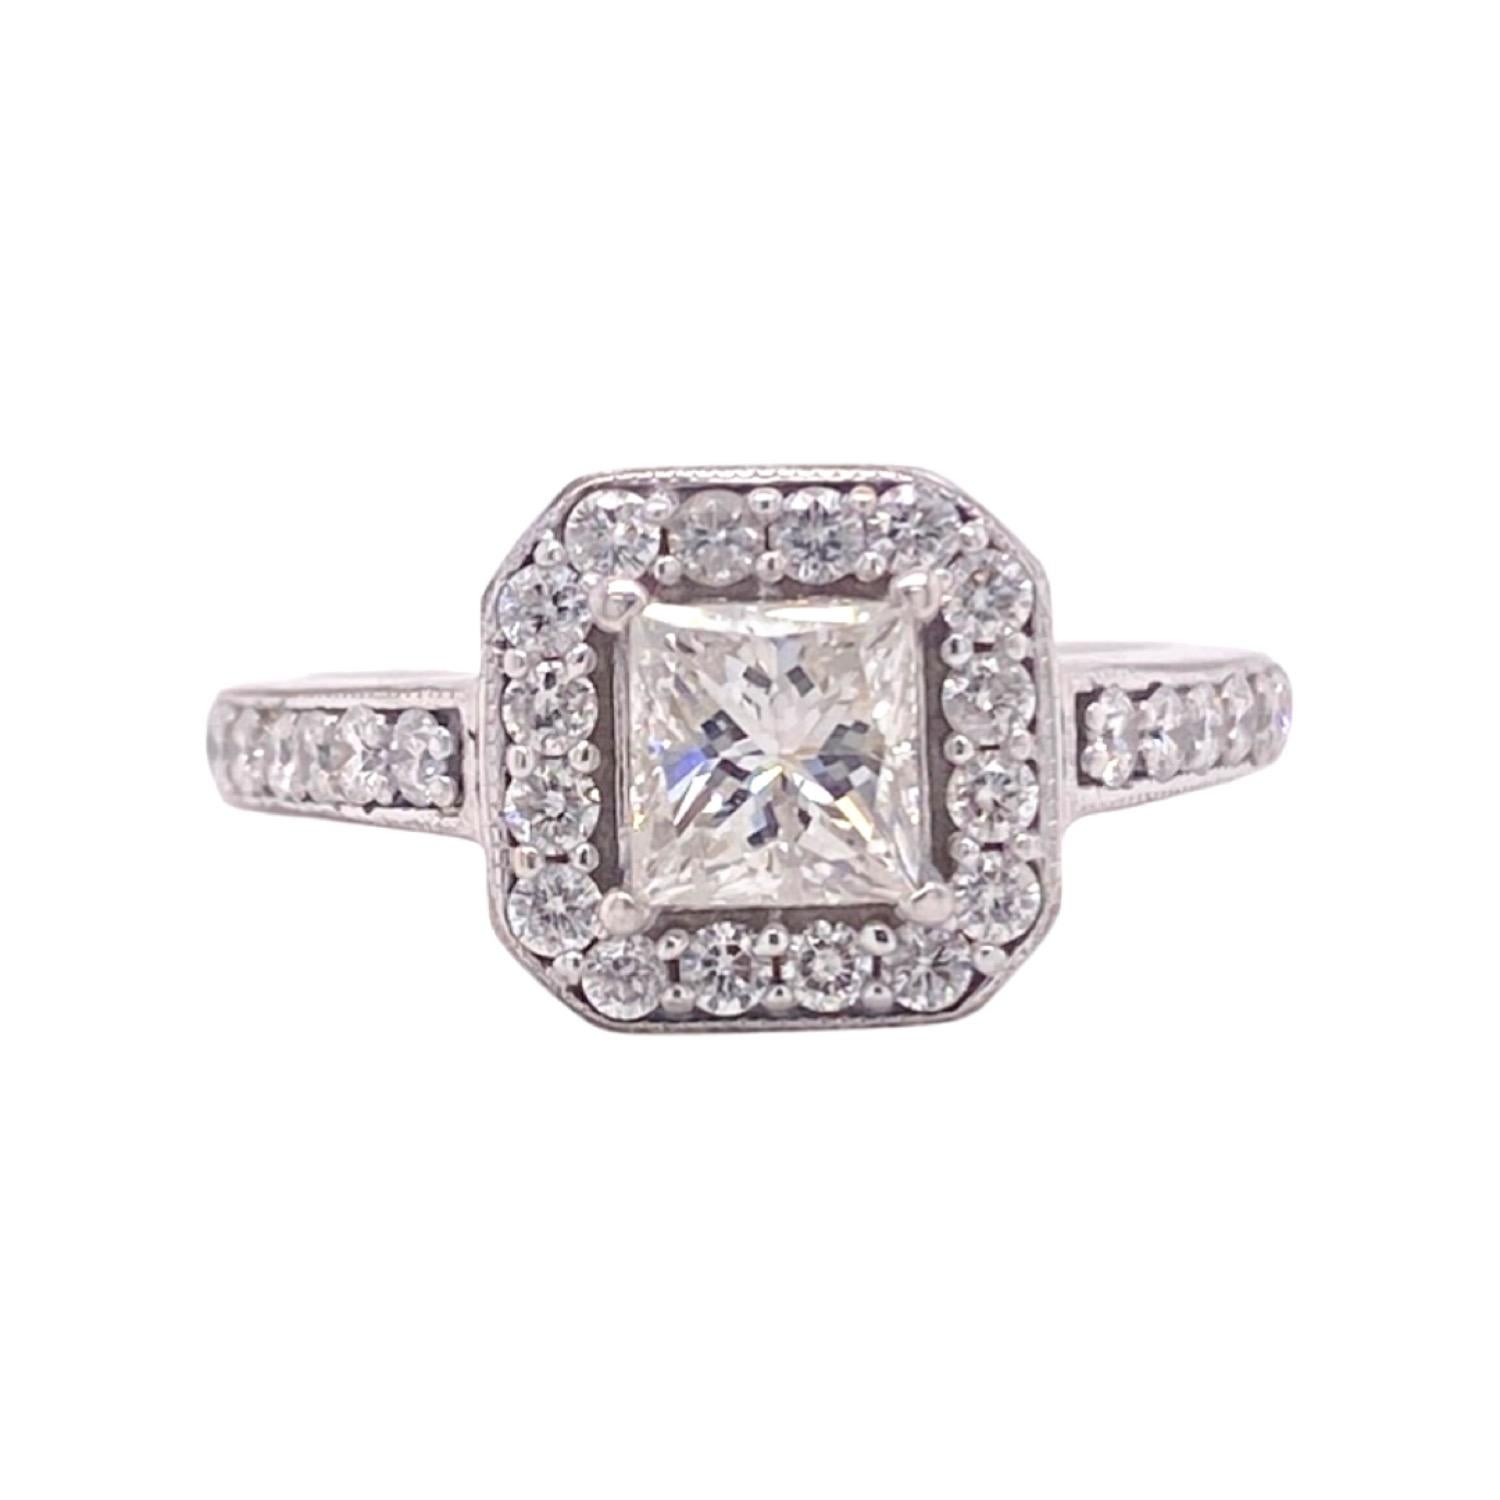 Princess Cut Diamond Halo Engagement Ring 1.45 Tcw 14kt White Gold For Sale 1